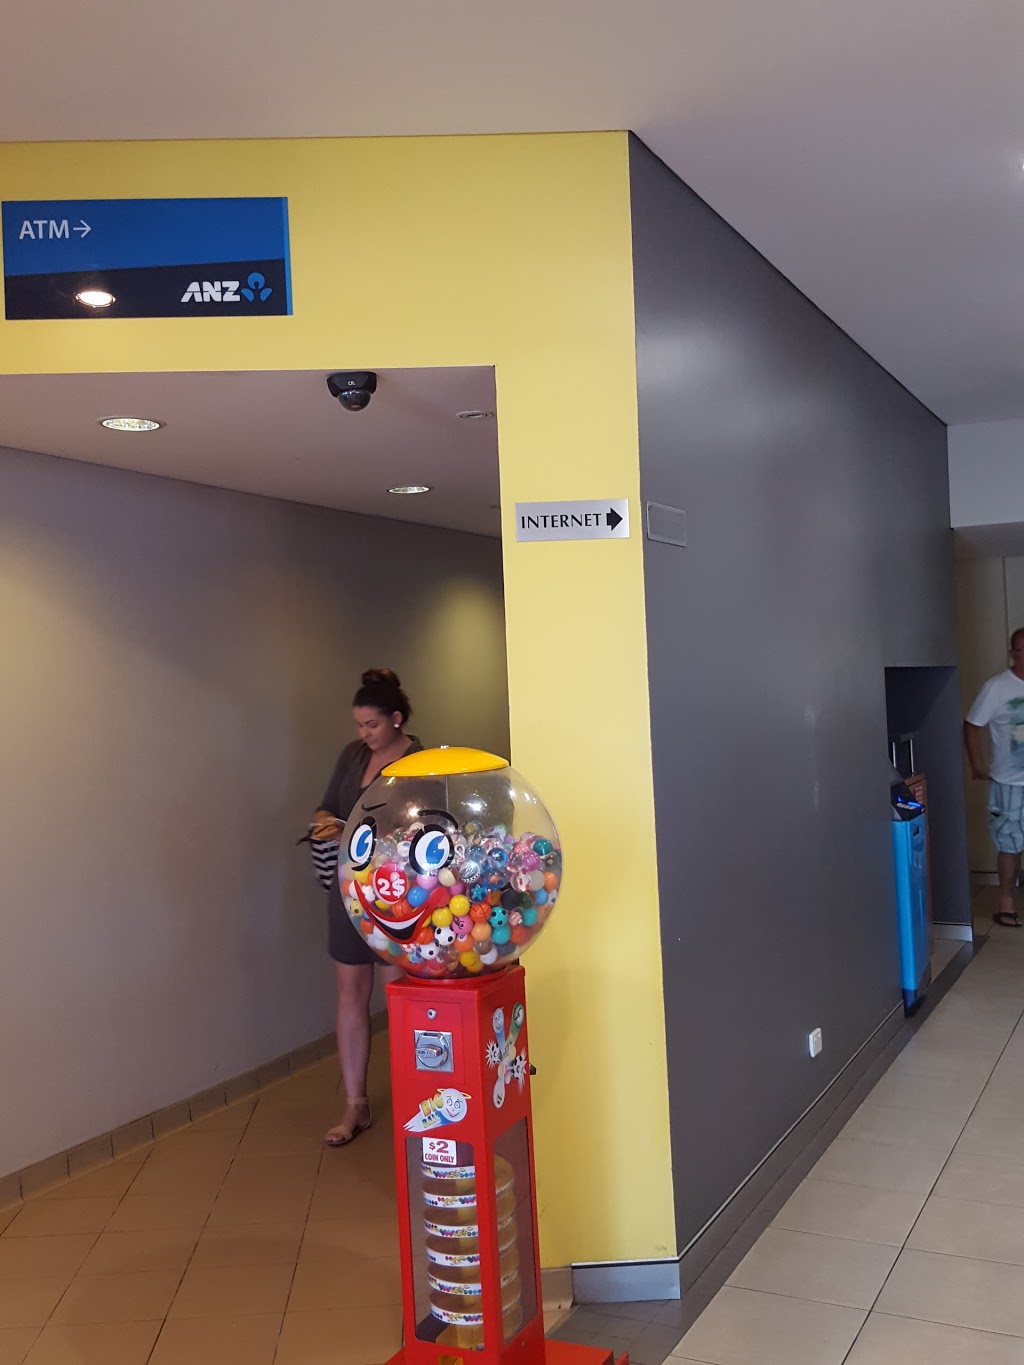 ANZ ATM Nudgee Shell | atm | 1097 Nudgee Rd, Nudgee QLD 4014, Australia | 131314 OR +61 131314